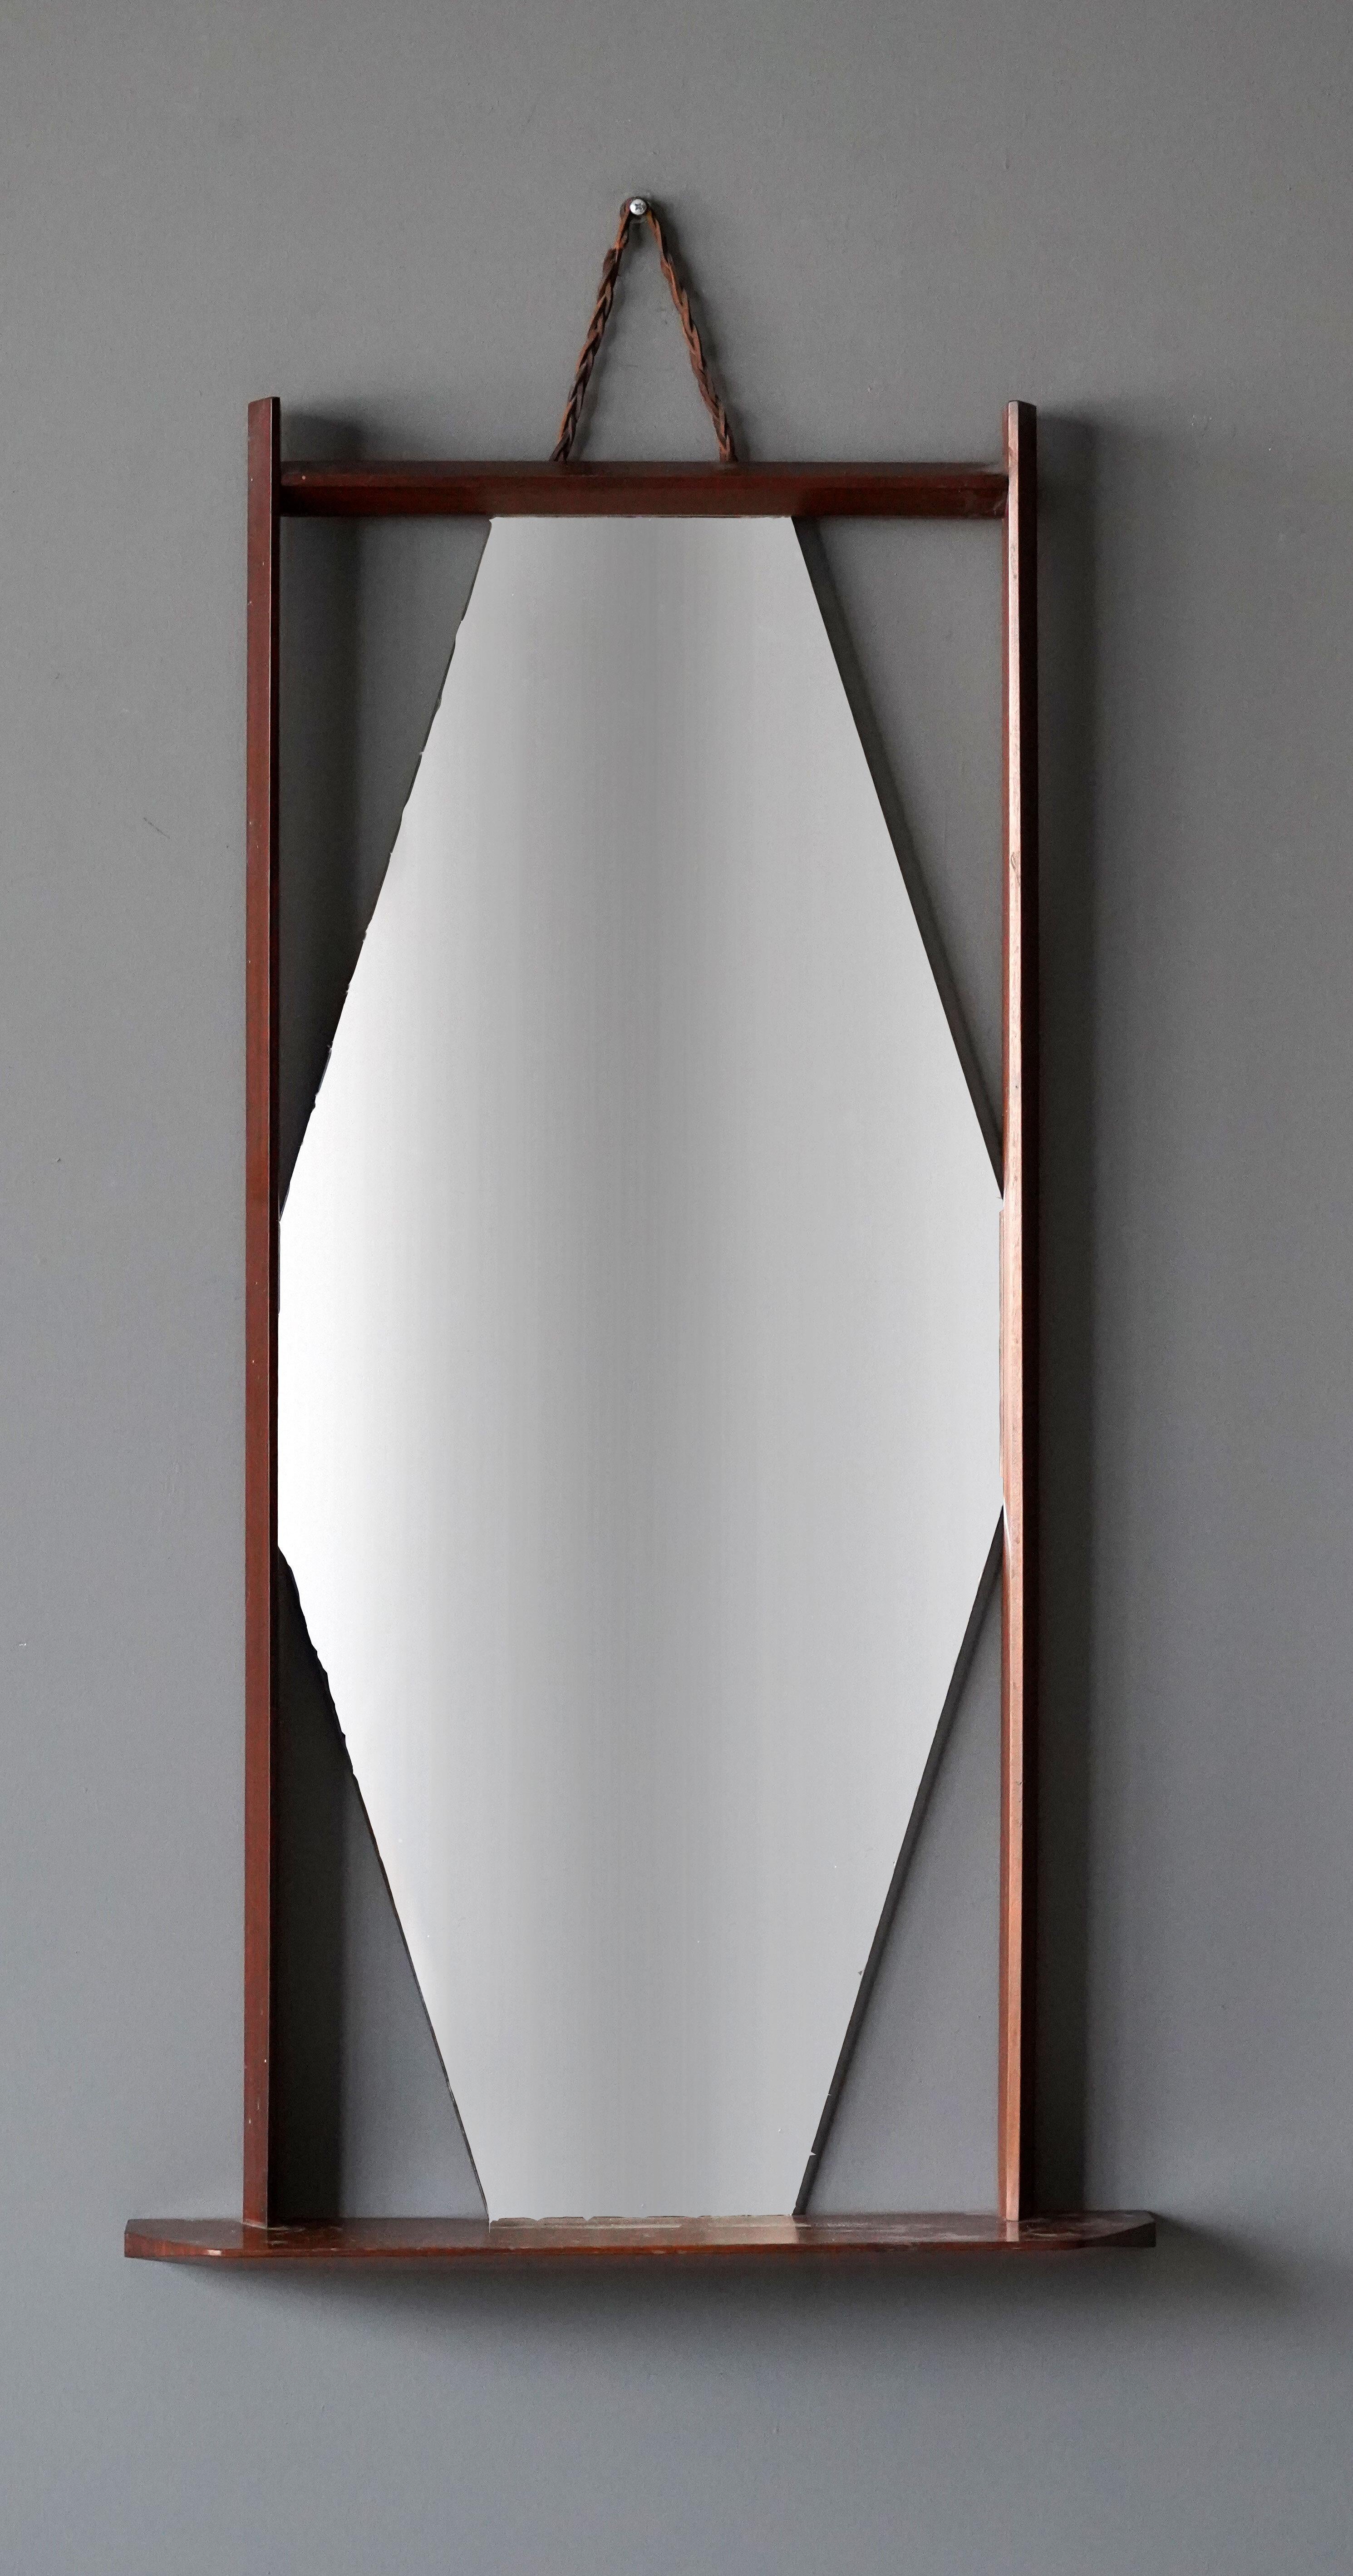 A wall mirror. Design attributed to Ico Parisi, compare model to the ‘Paraggi’ mirror. Produced in Italy, 1950s. 

 